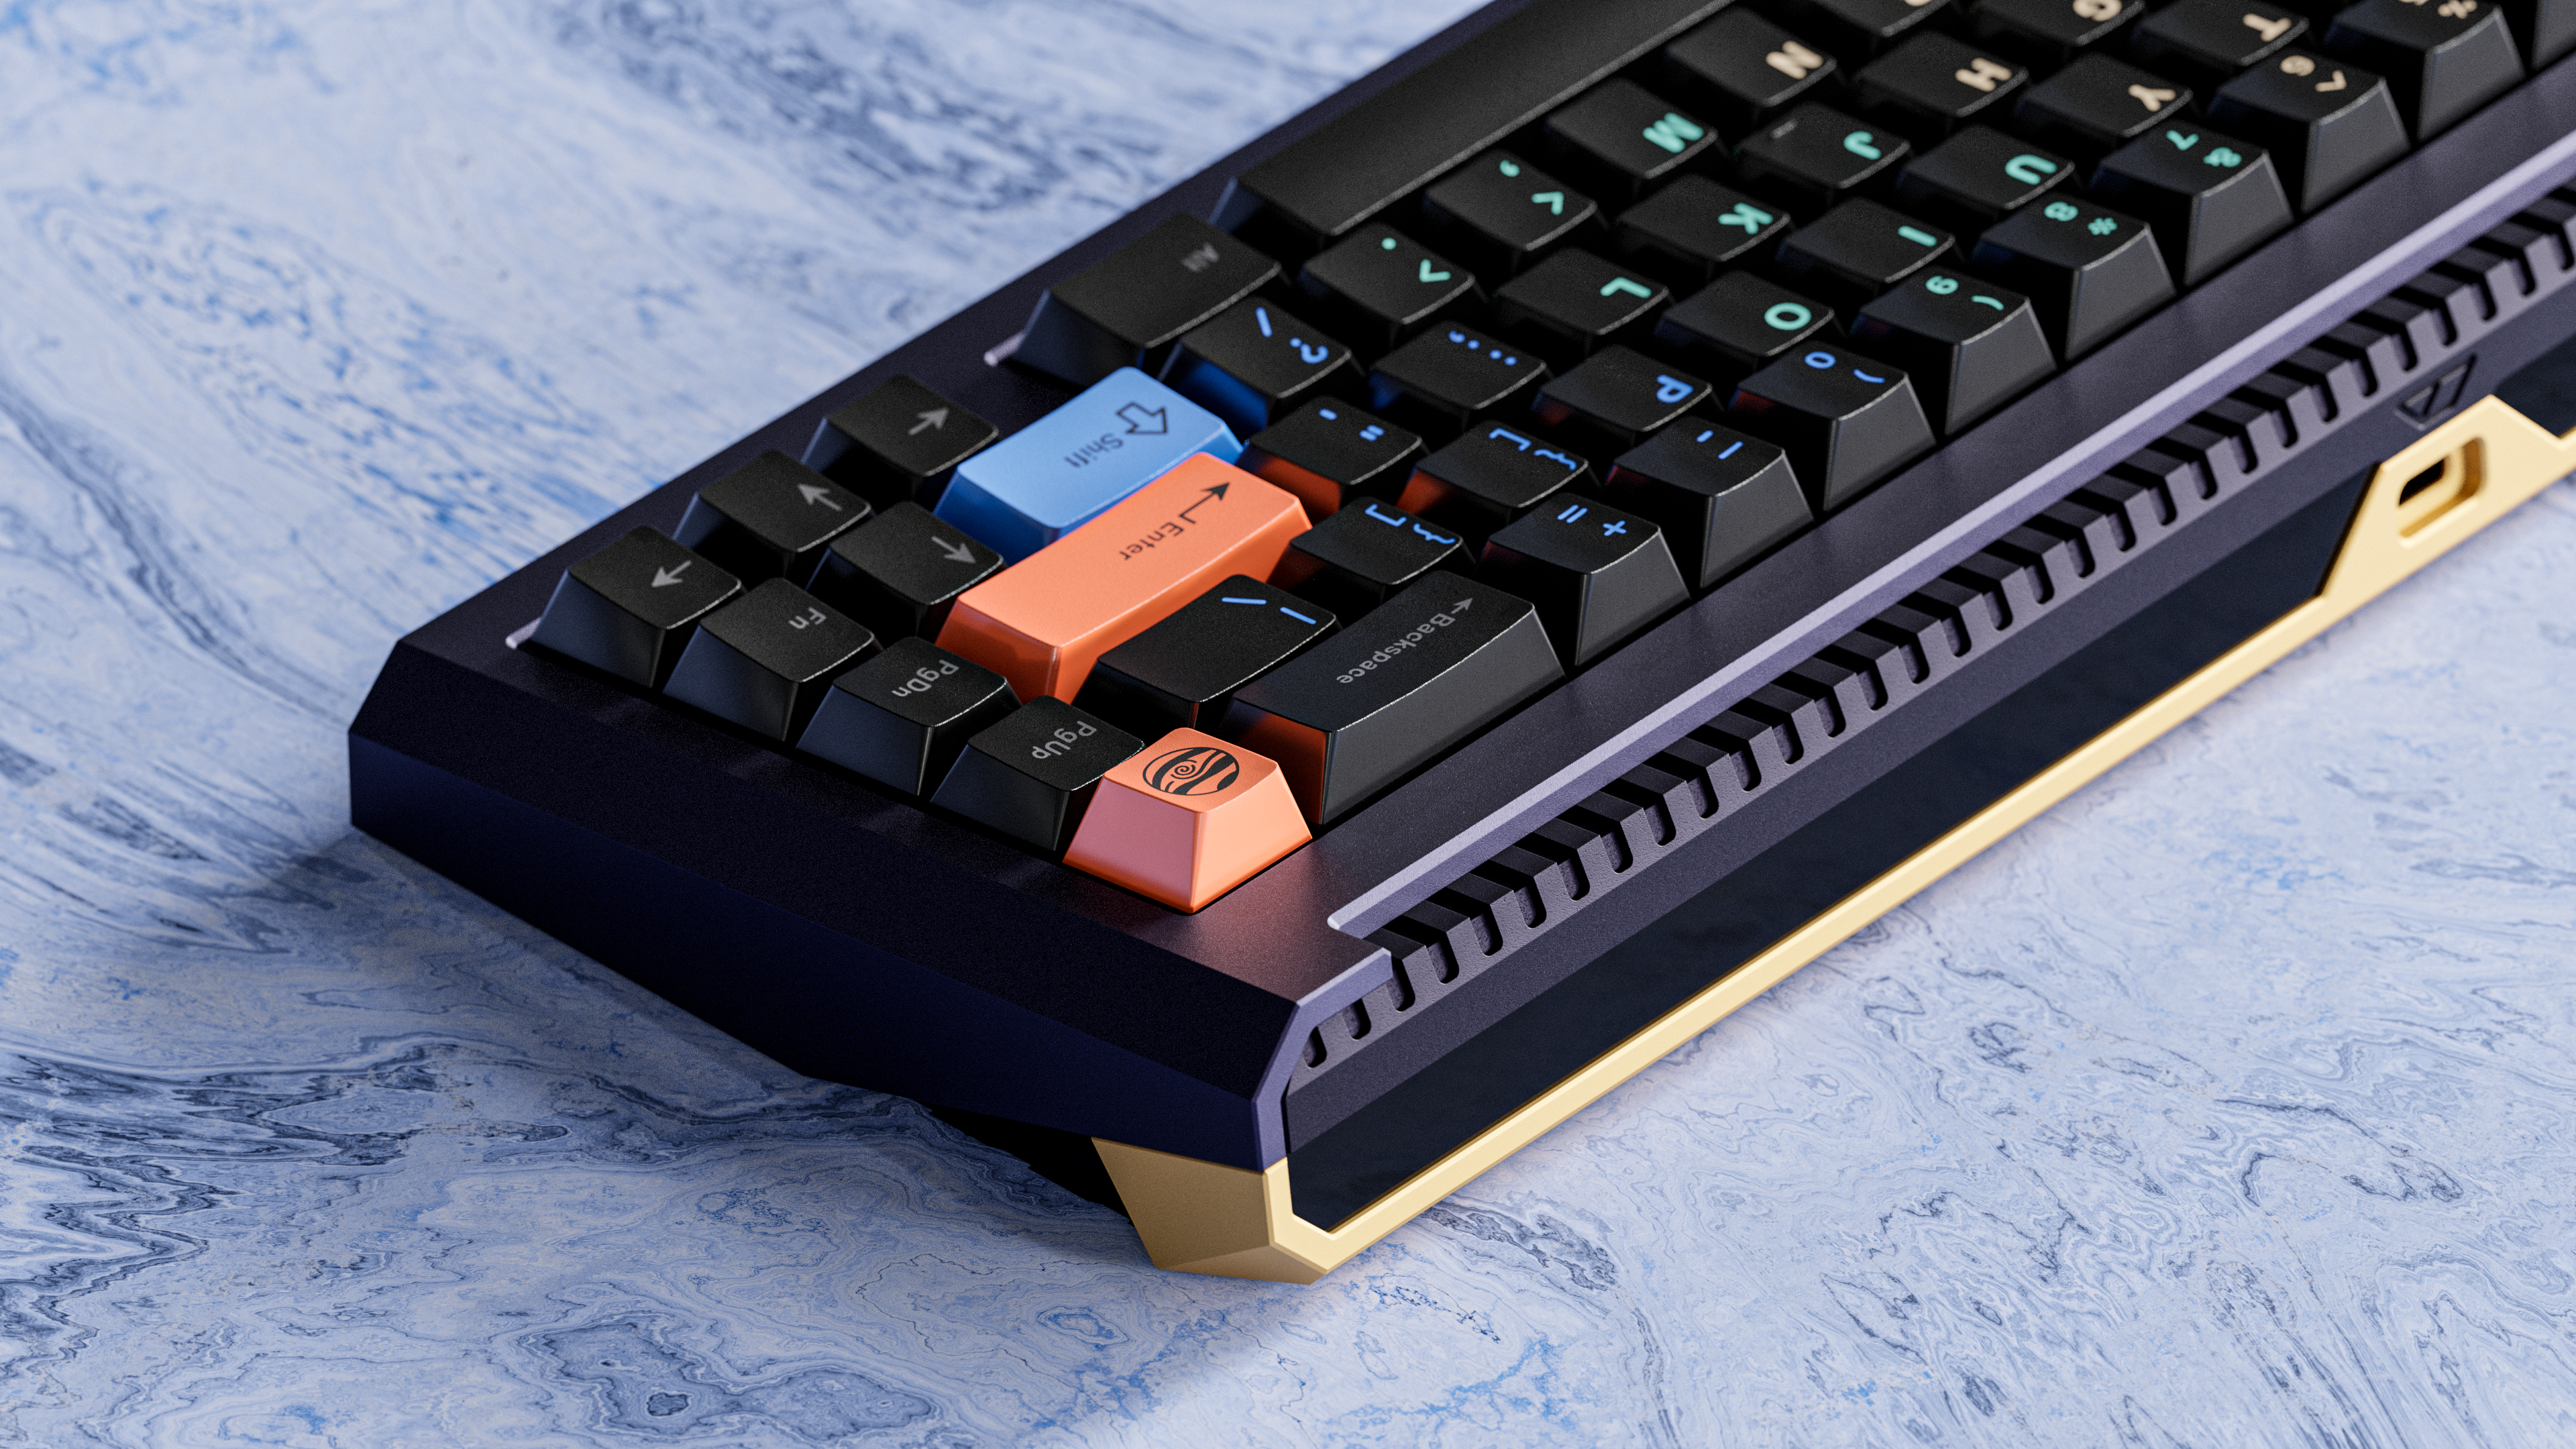 KKB Outer Bounds Keycaps - Group-Buy